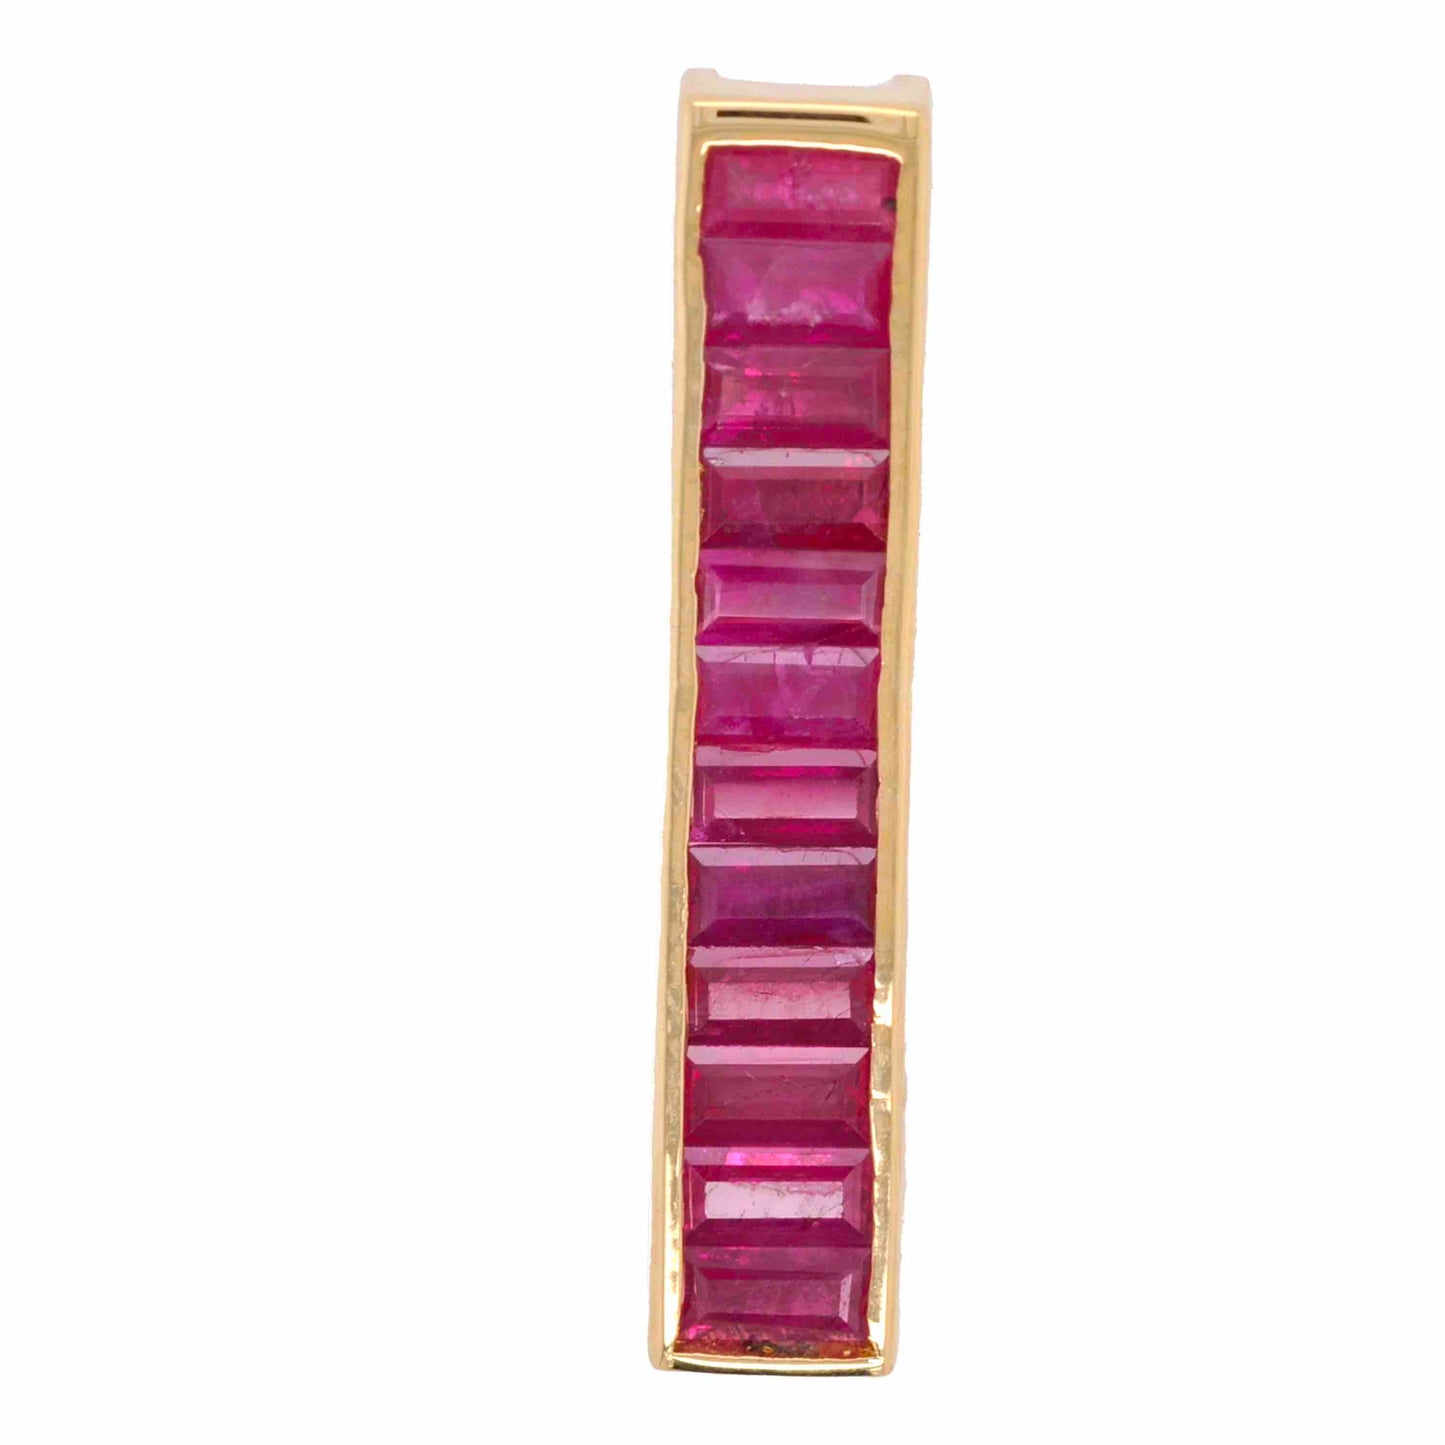 Ruby pendant necklace with bar design